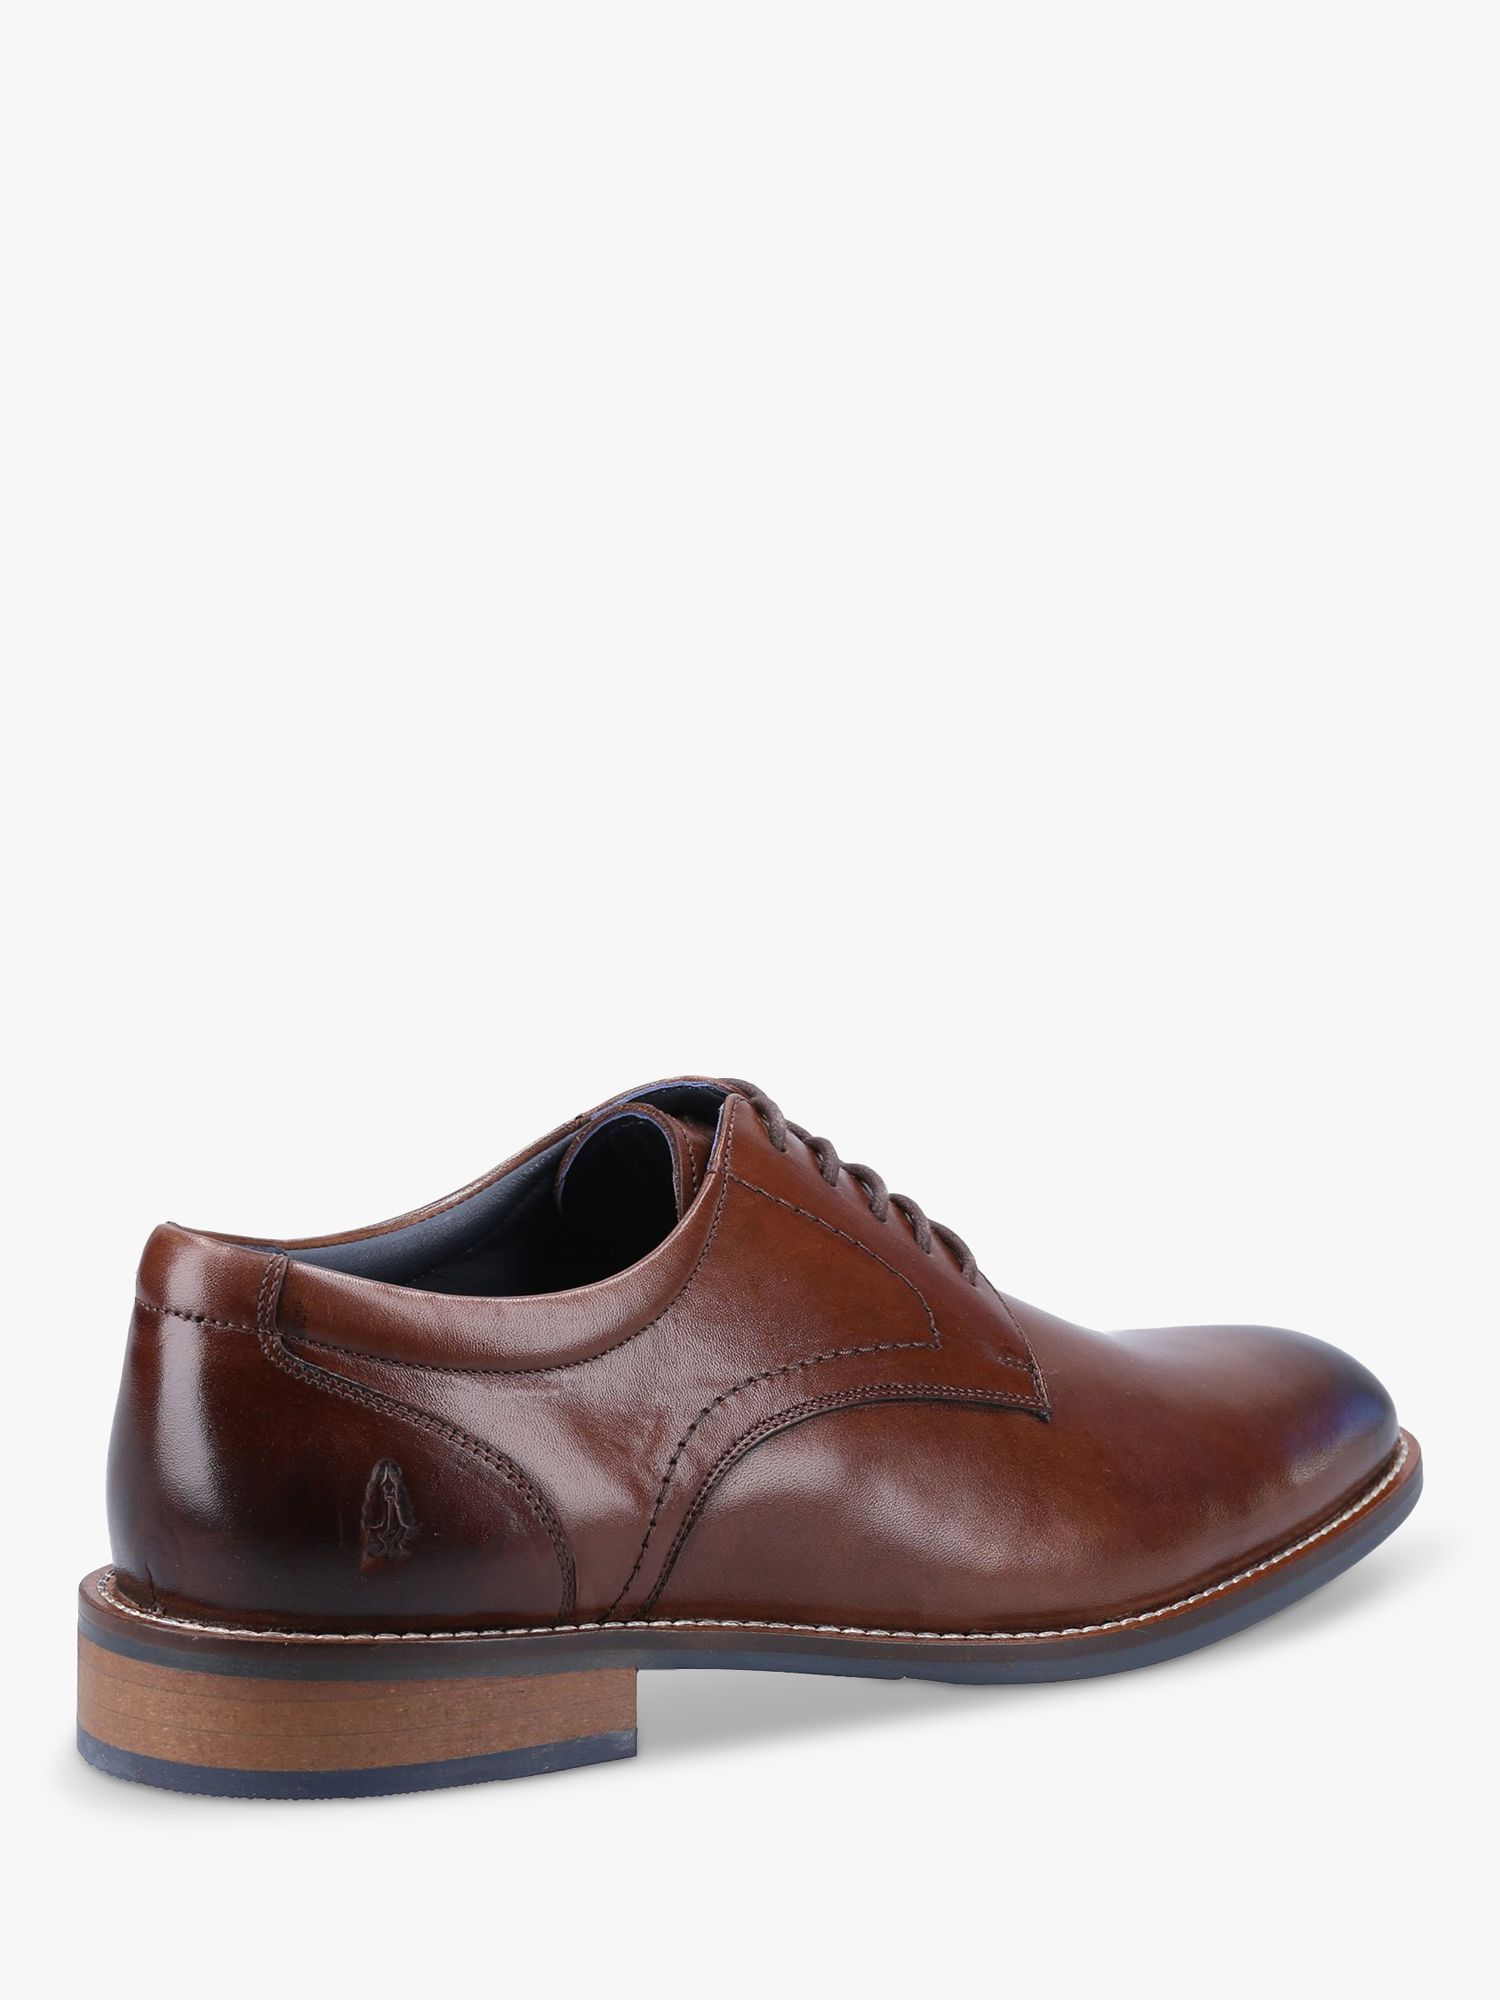 Hush Puppies Damien Leather Derby Shoes, Chocolate, 6